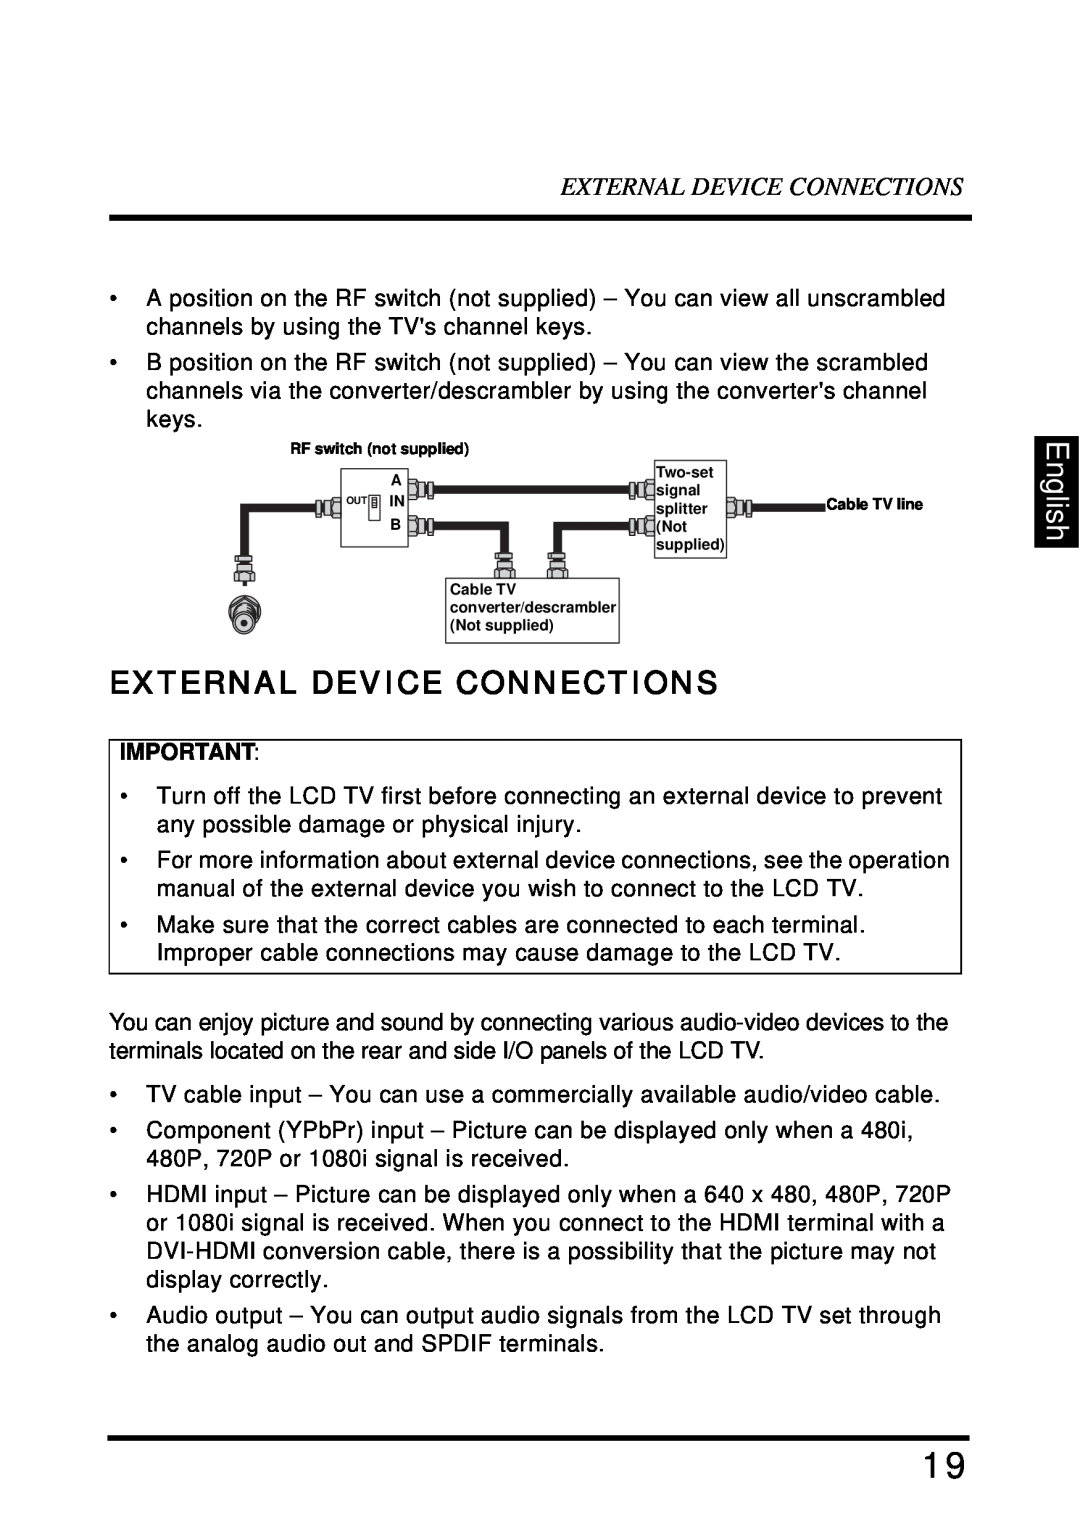 Westinghouse SK-32H640G user manual External Device Connections, English 